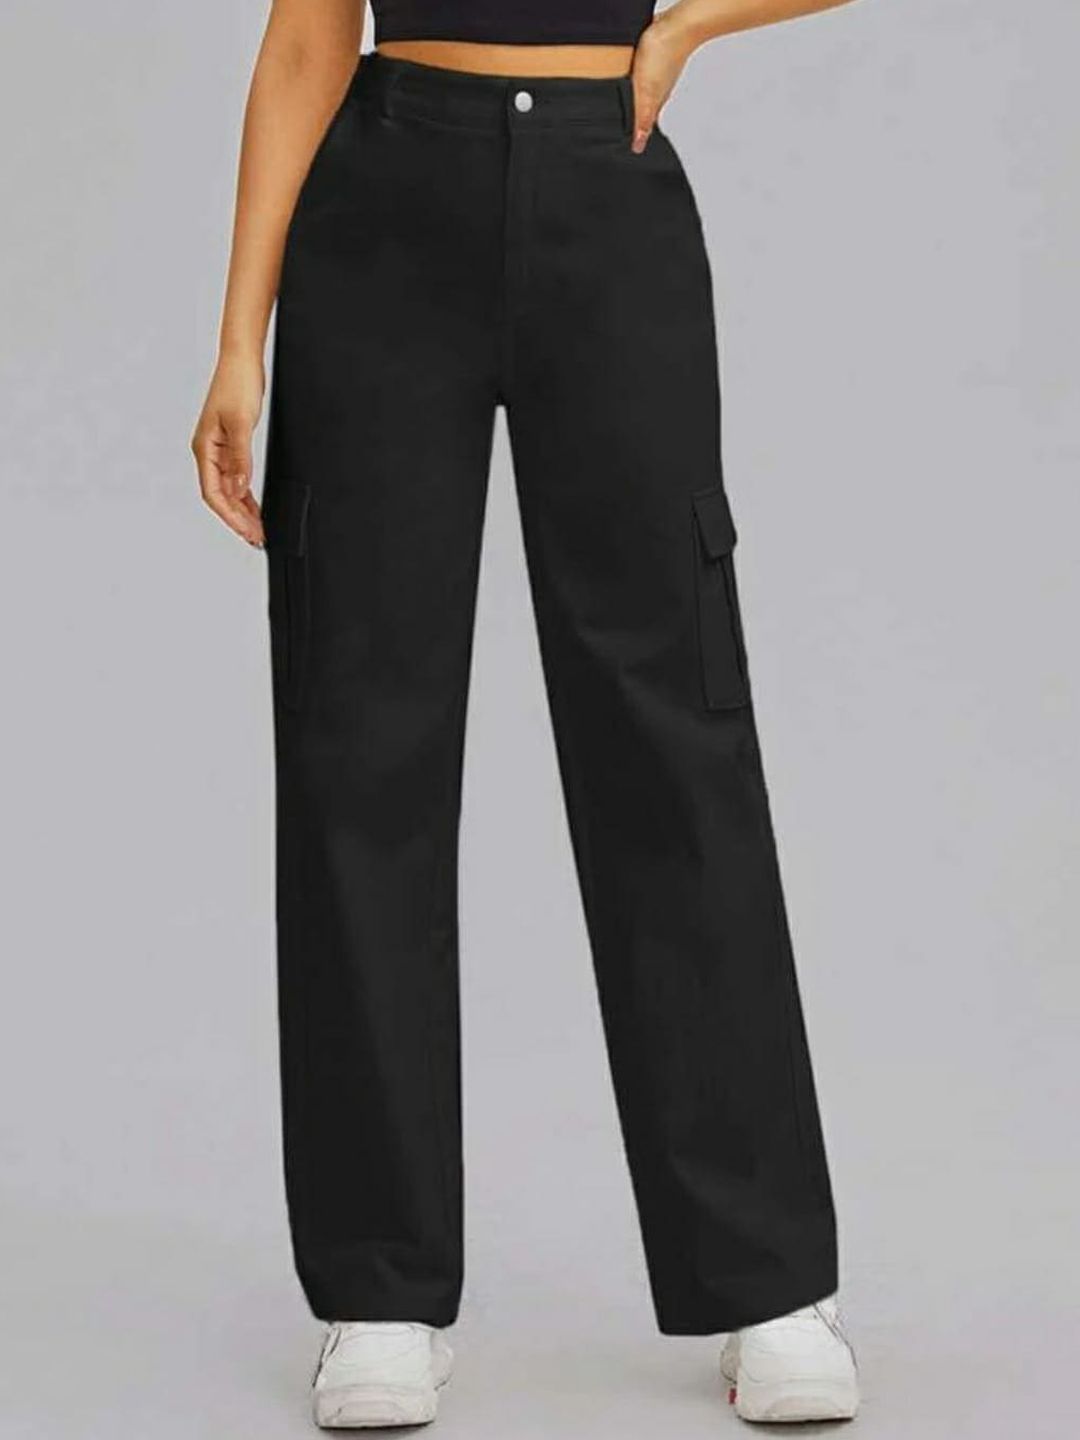 Next One Women Straight Leg High-Rise Cargos Trousers Price in India